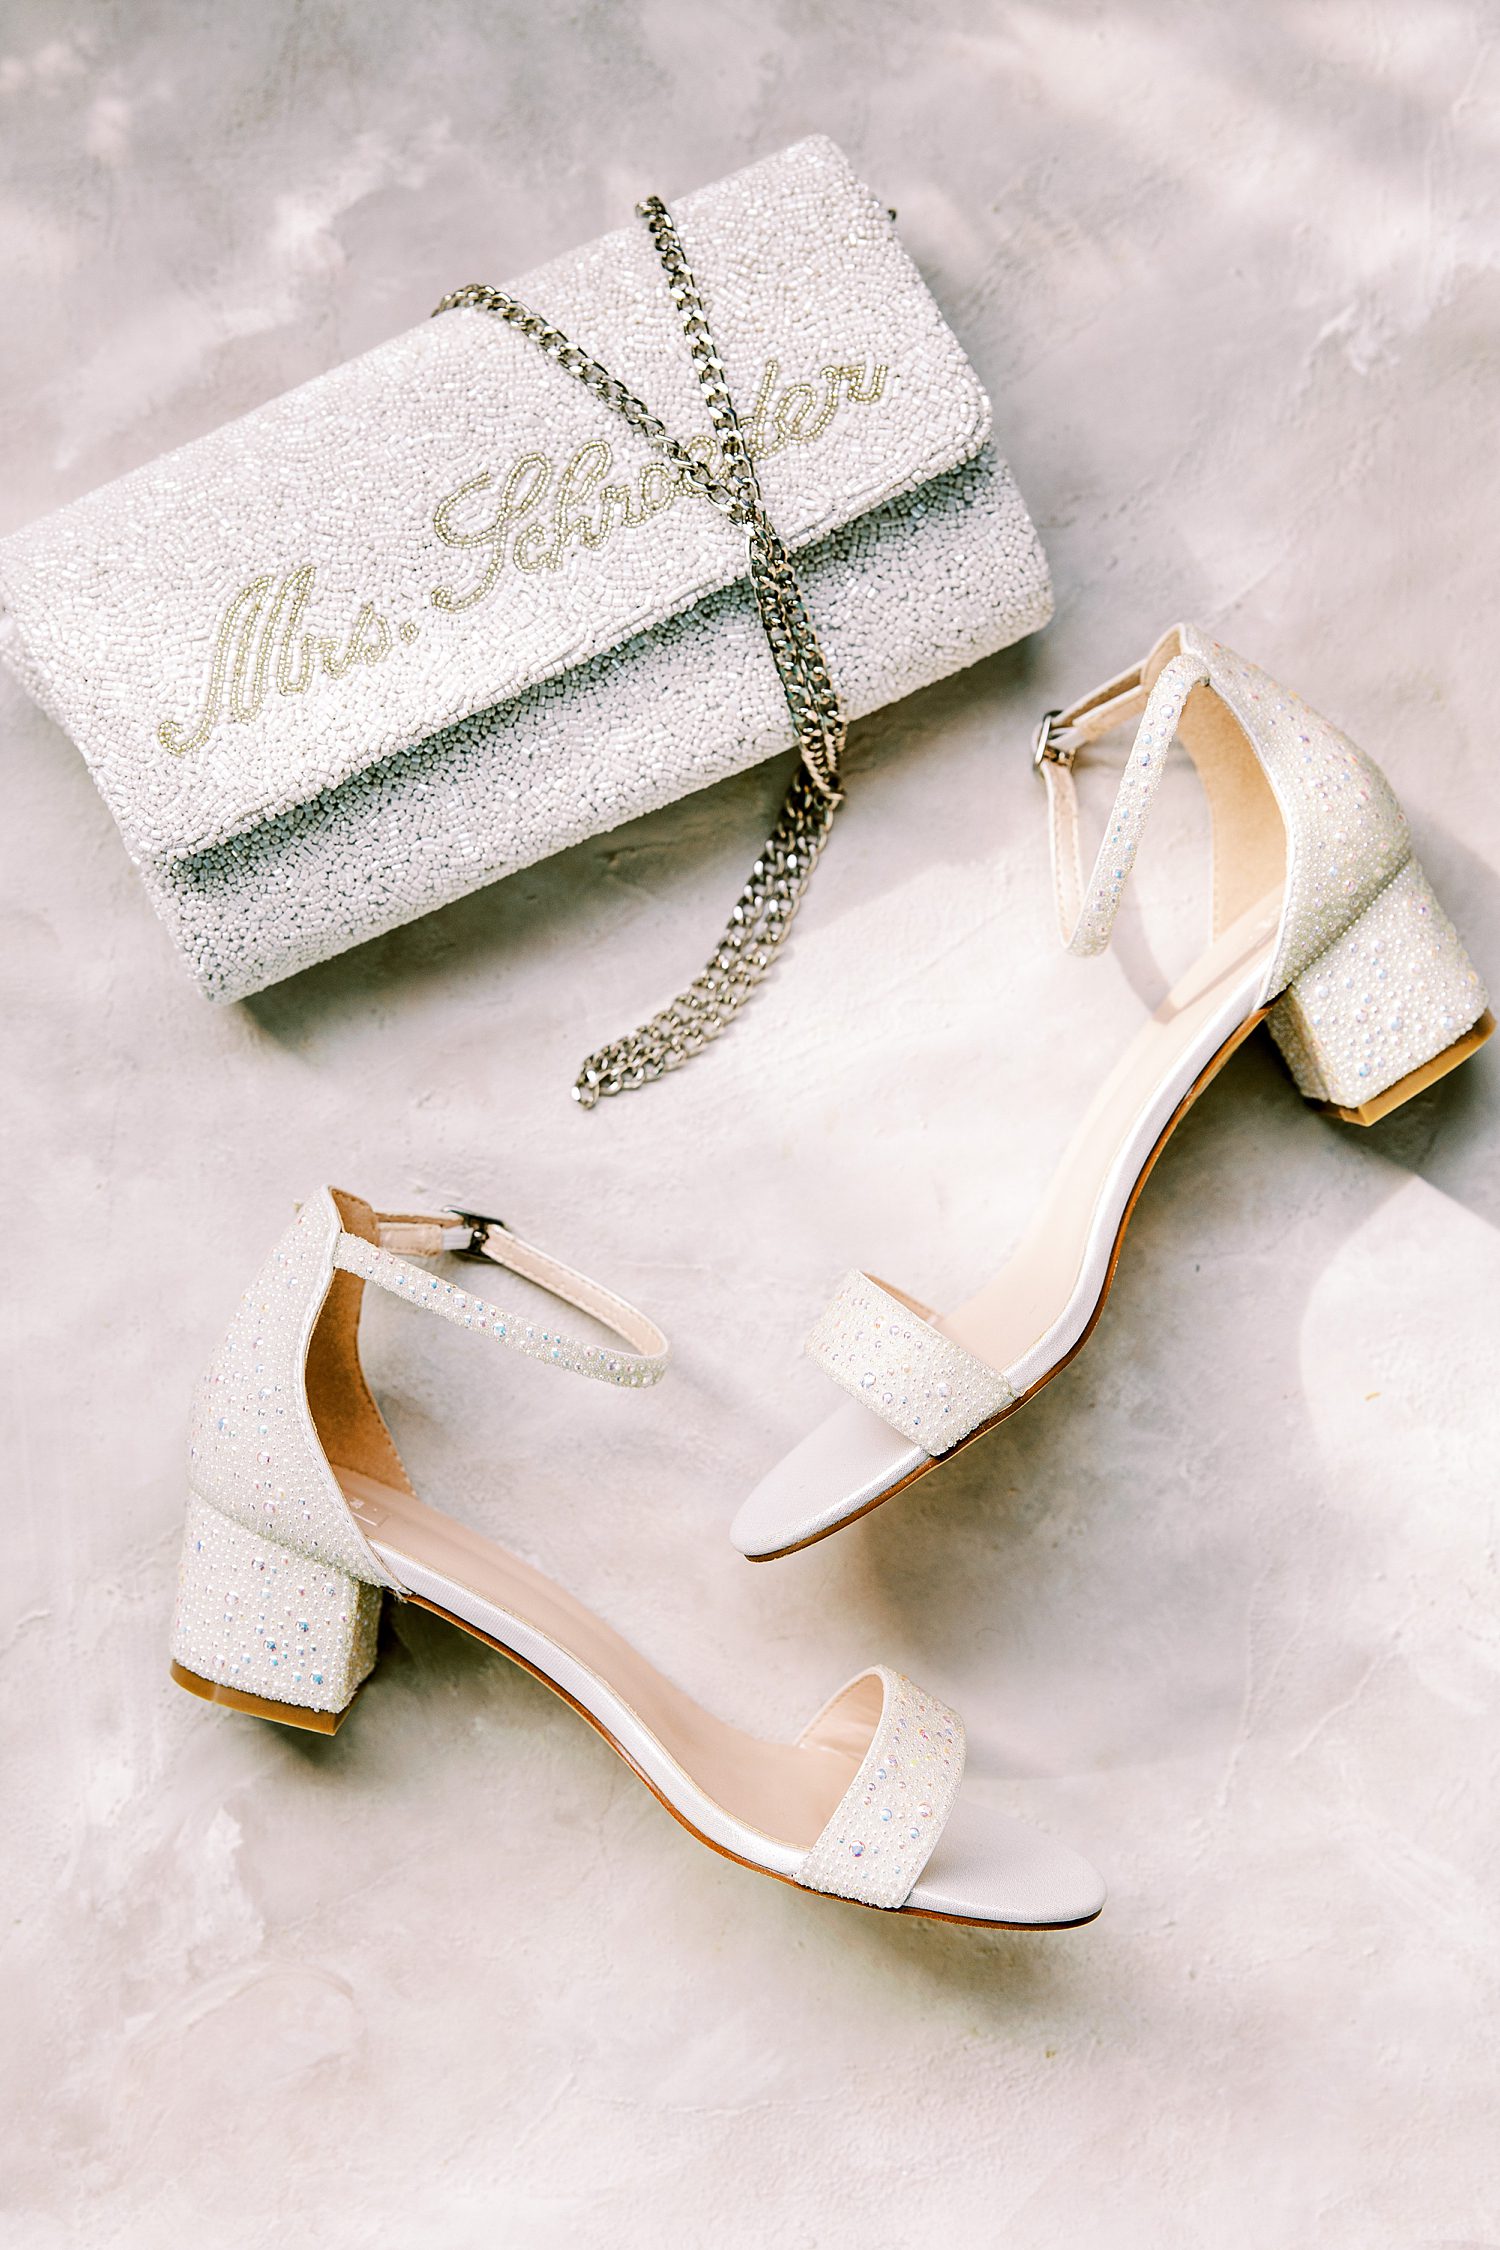 bries shoes and custom clutch for Florida wedding 